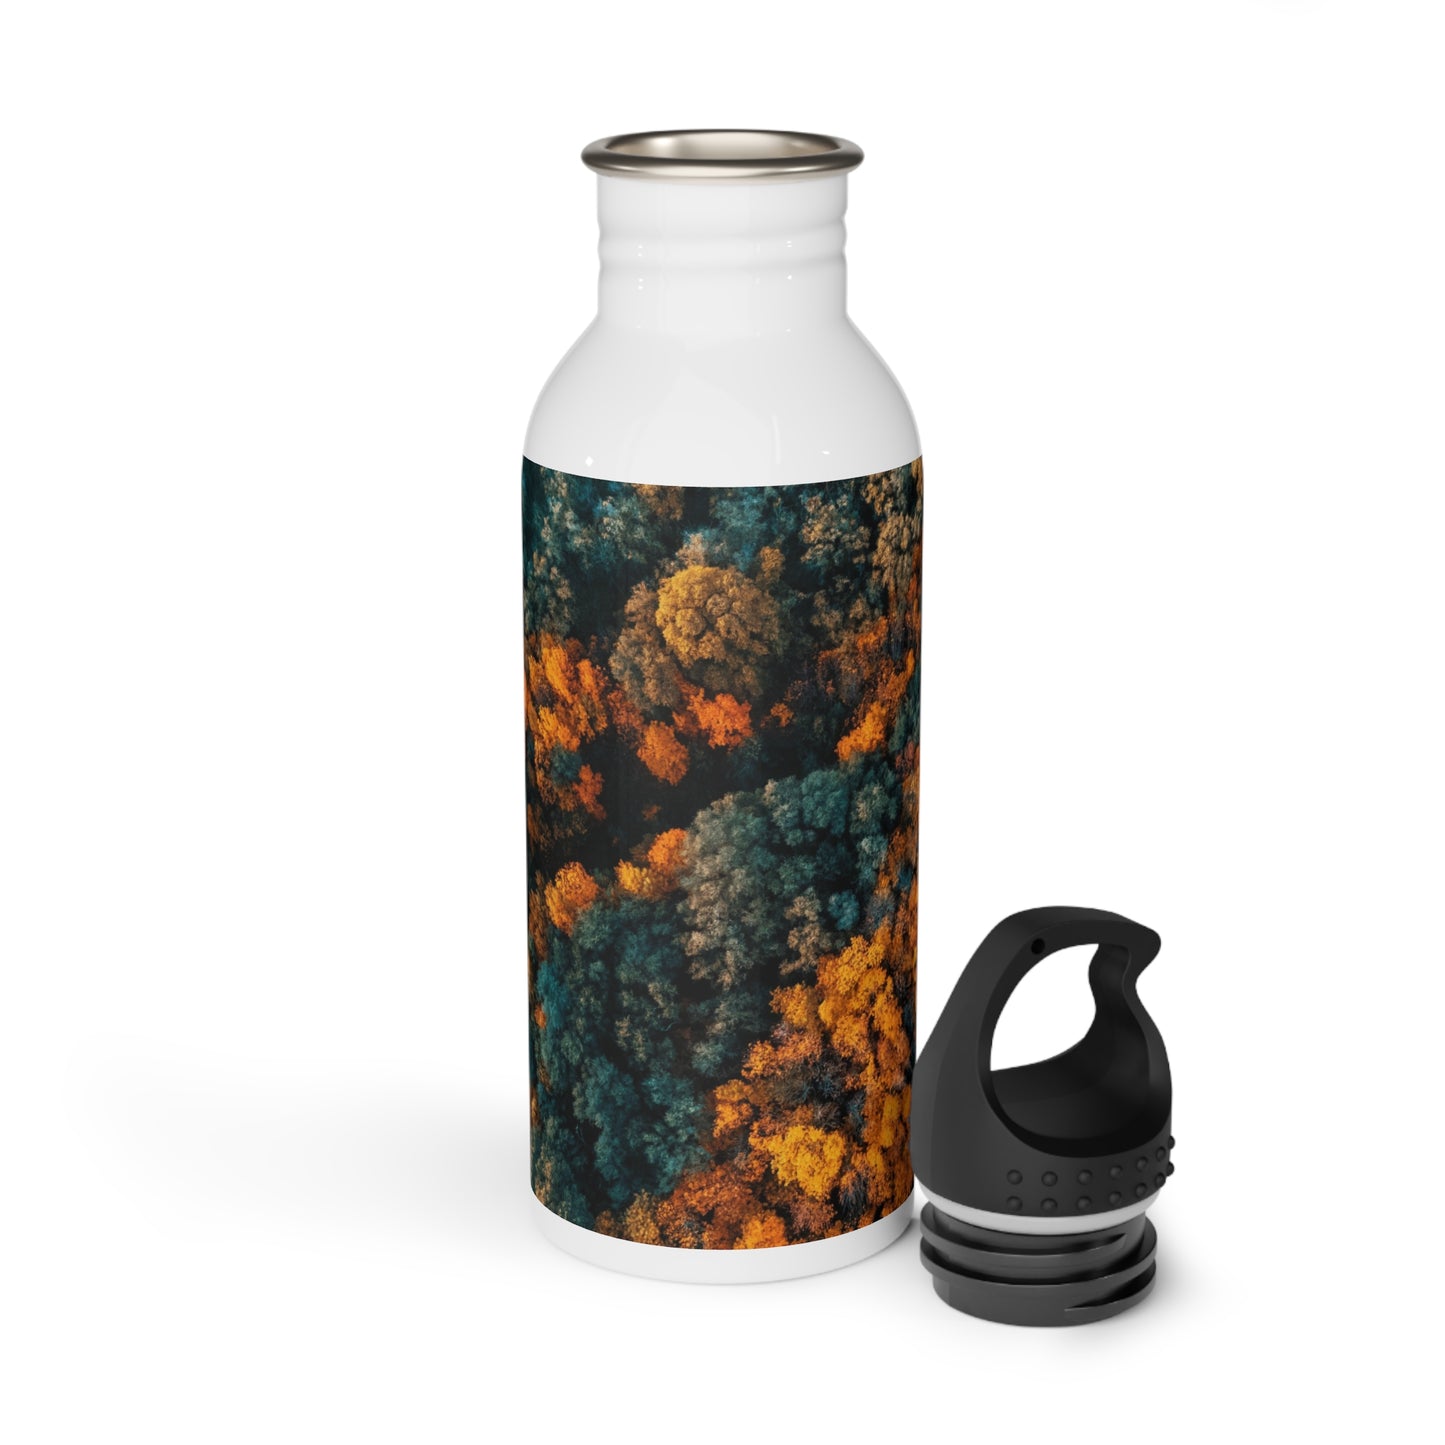 Stainless Steel Water Bottle, Forest bird's view, Stainless Steel Water Bottle, Made with 18/8 food-grade stainless steel, wide neck for effortless sipping